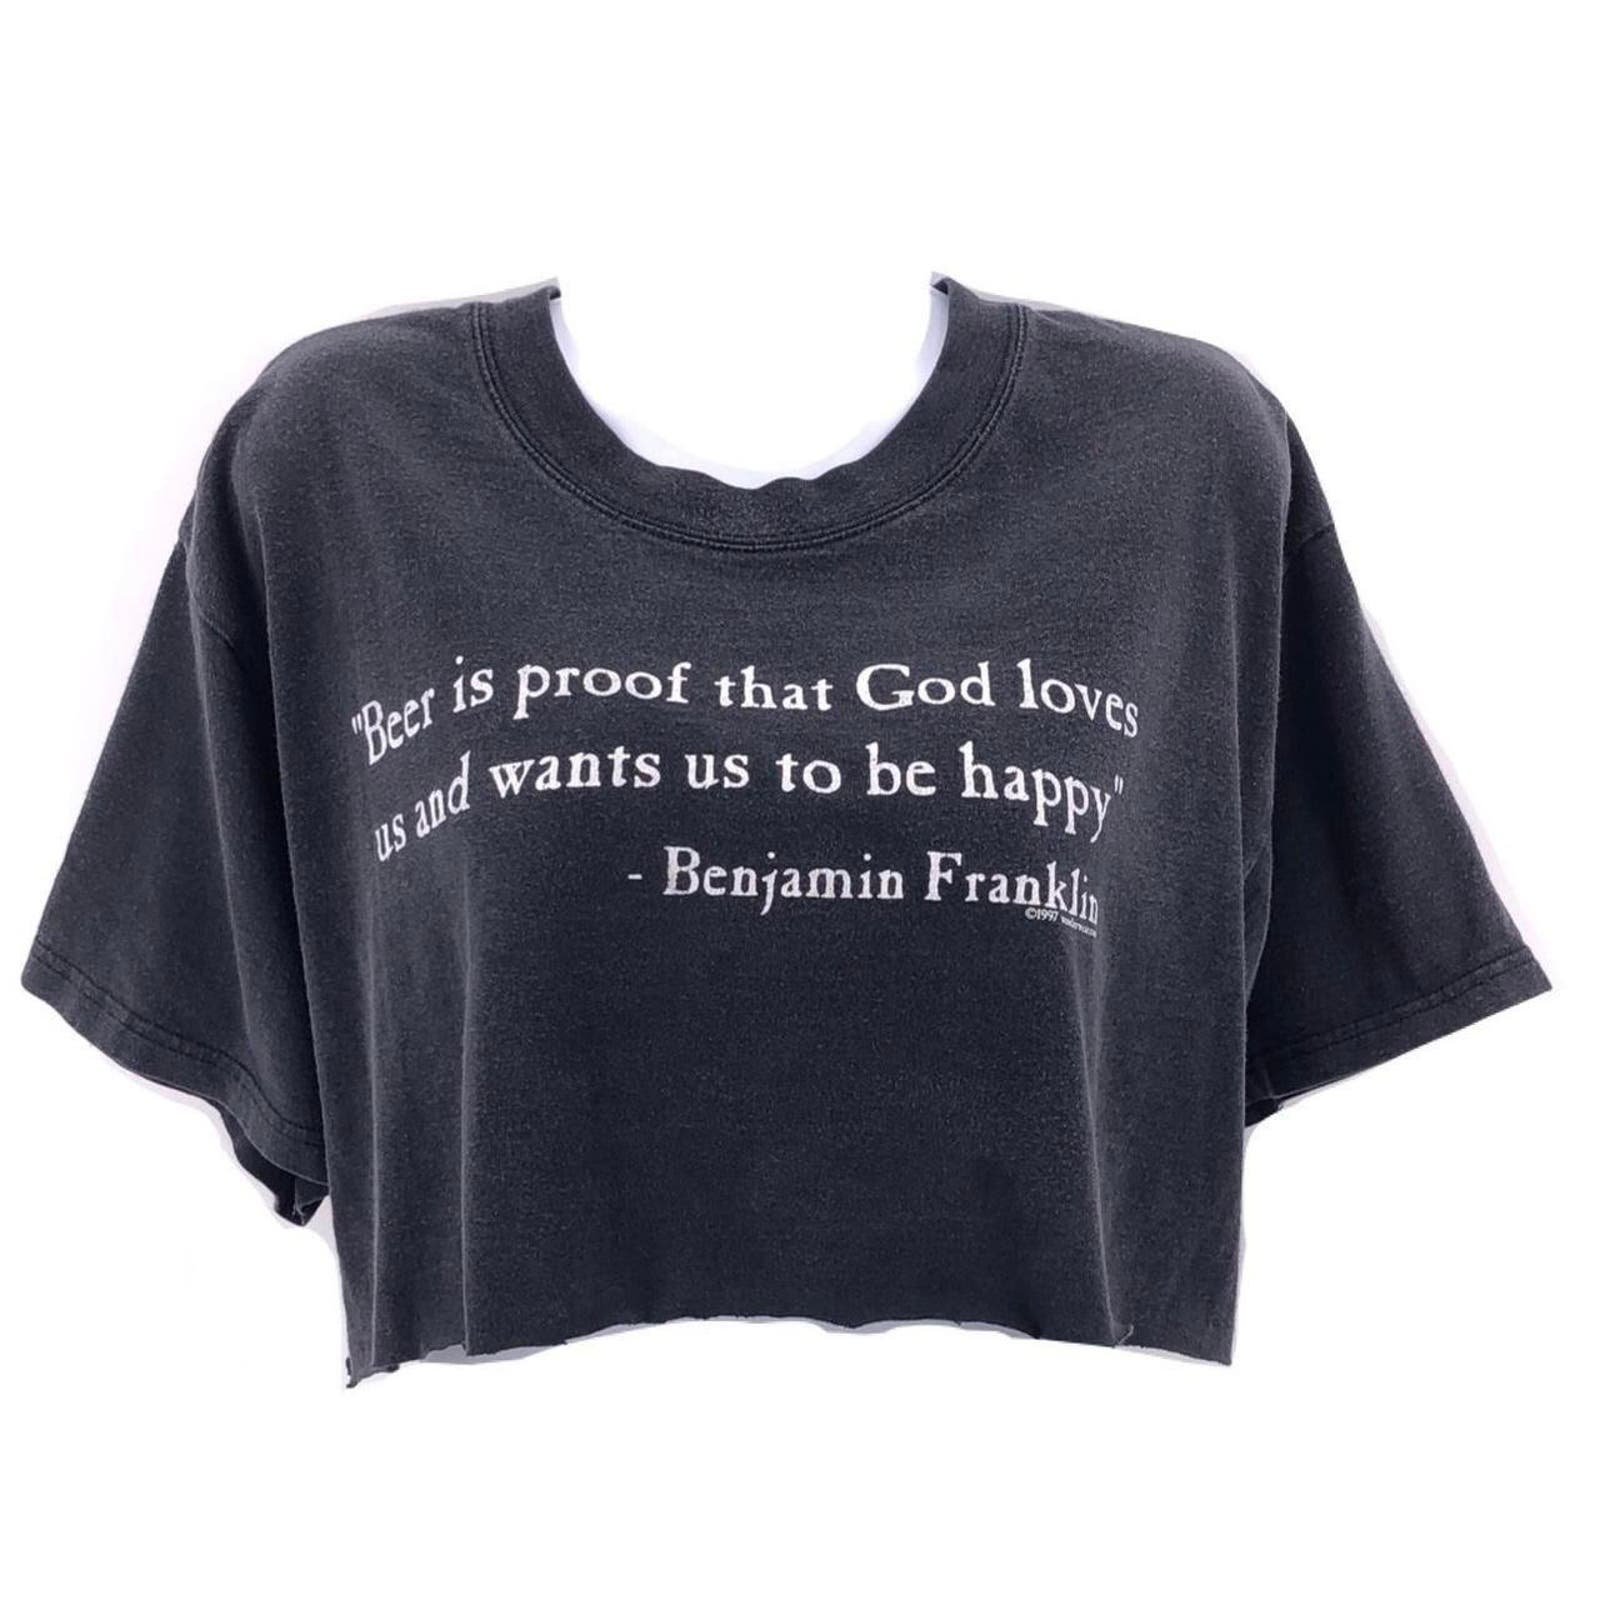 90s Benjamin Franklin funny beer quote cropped tshirt 1